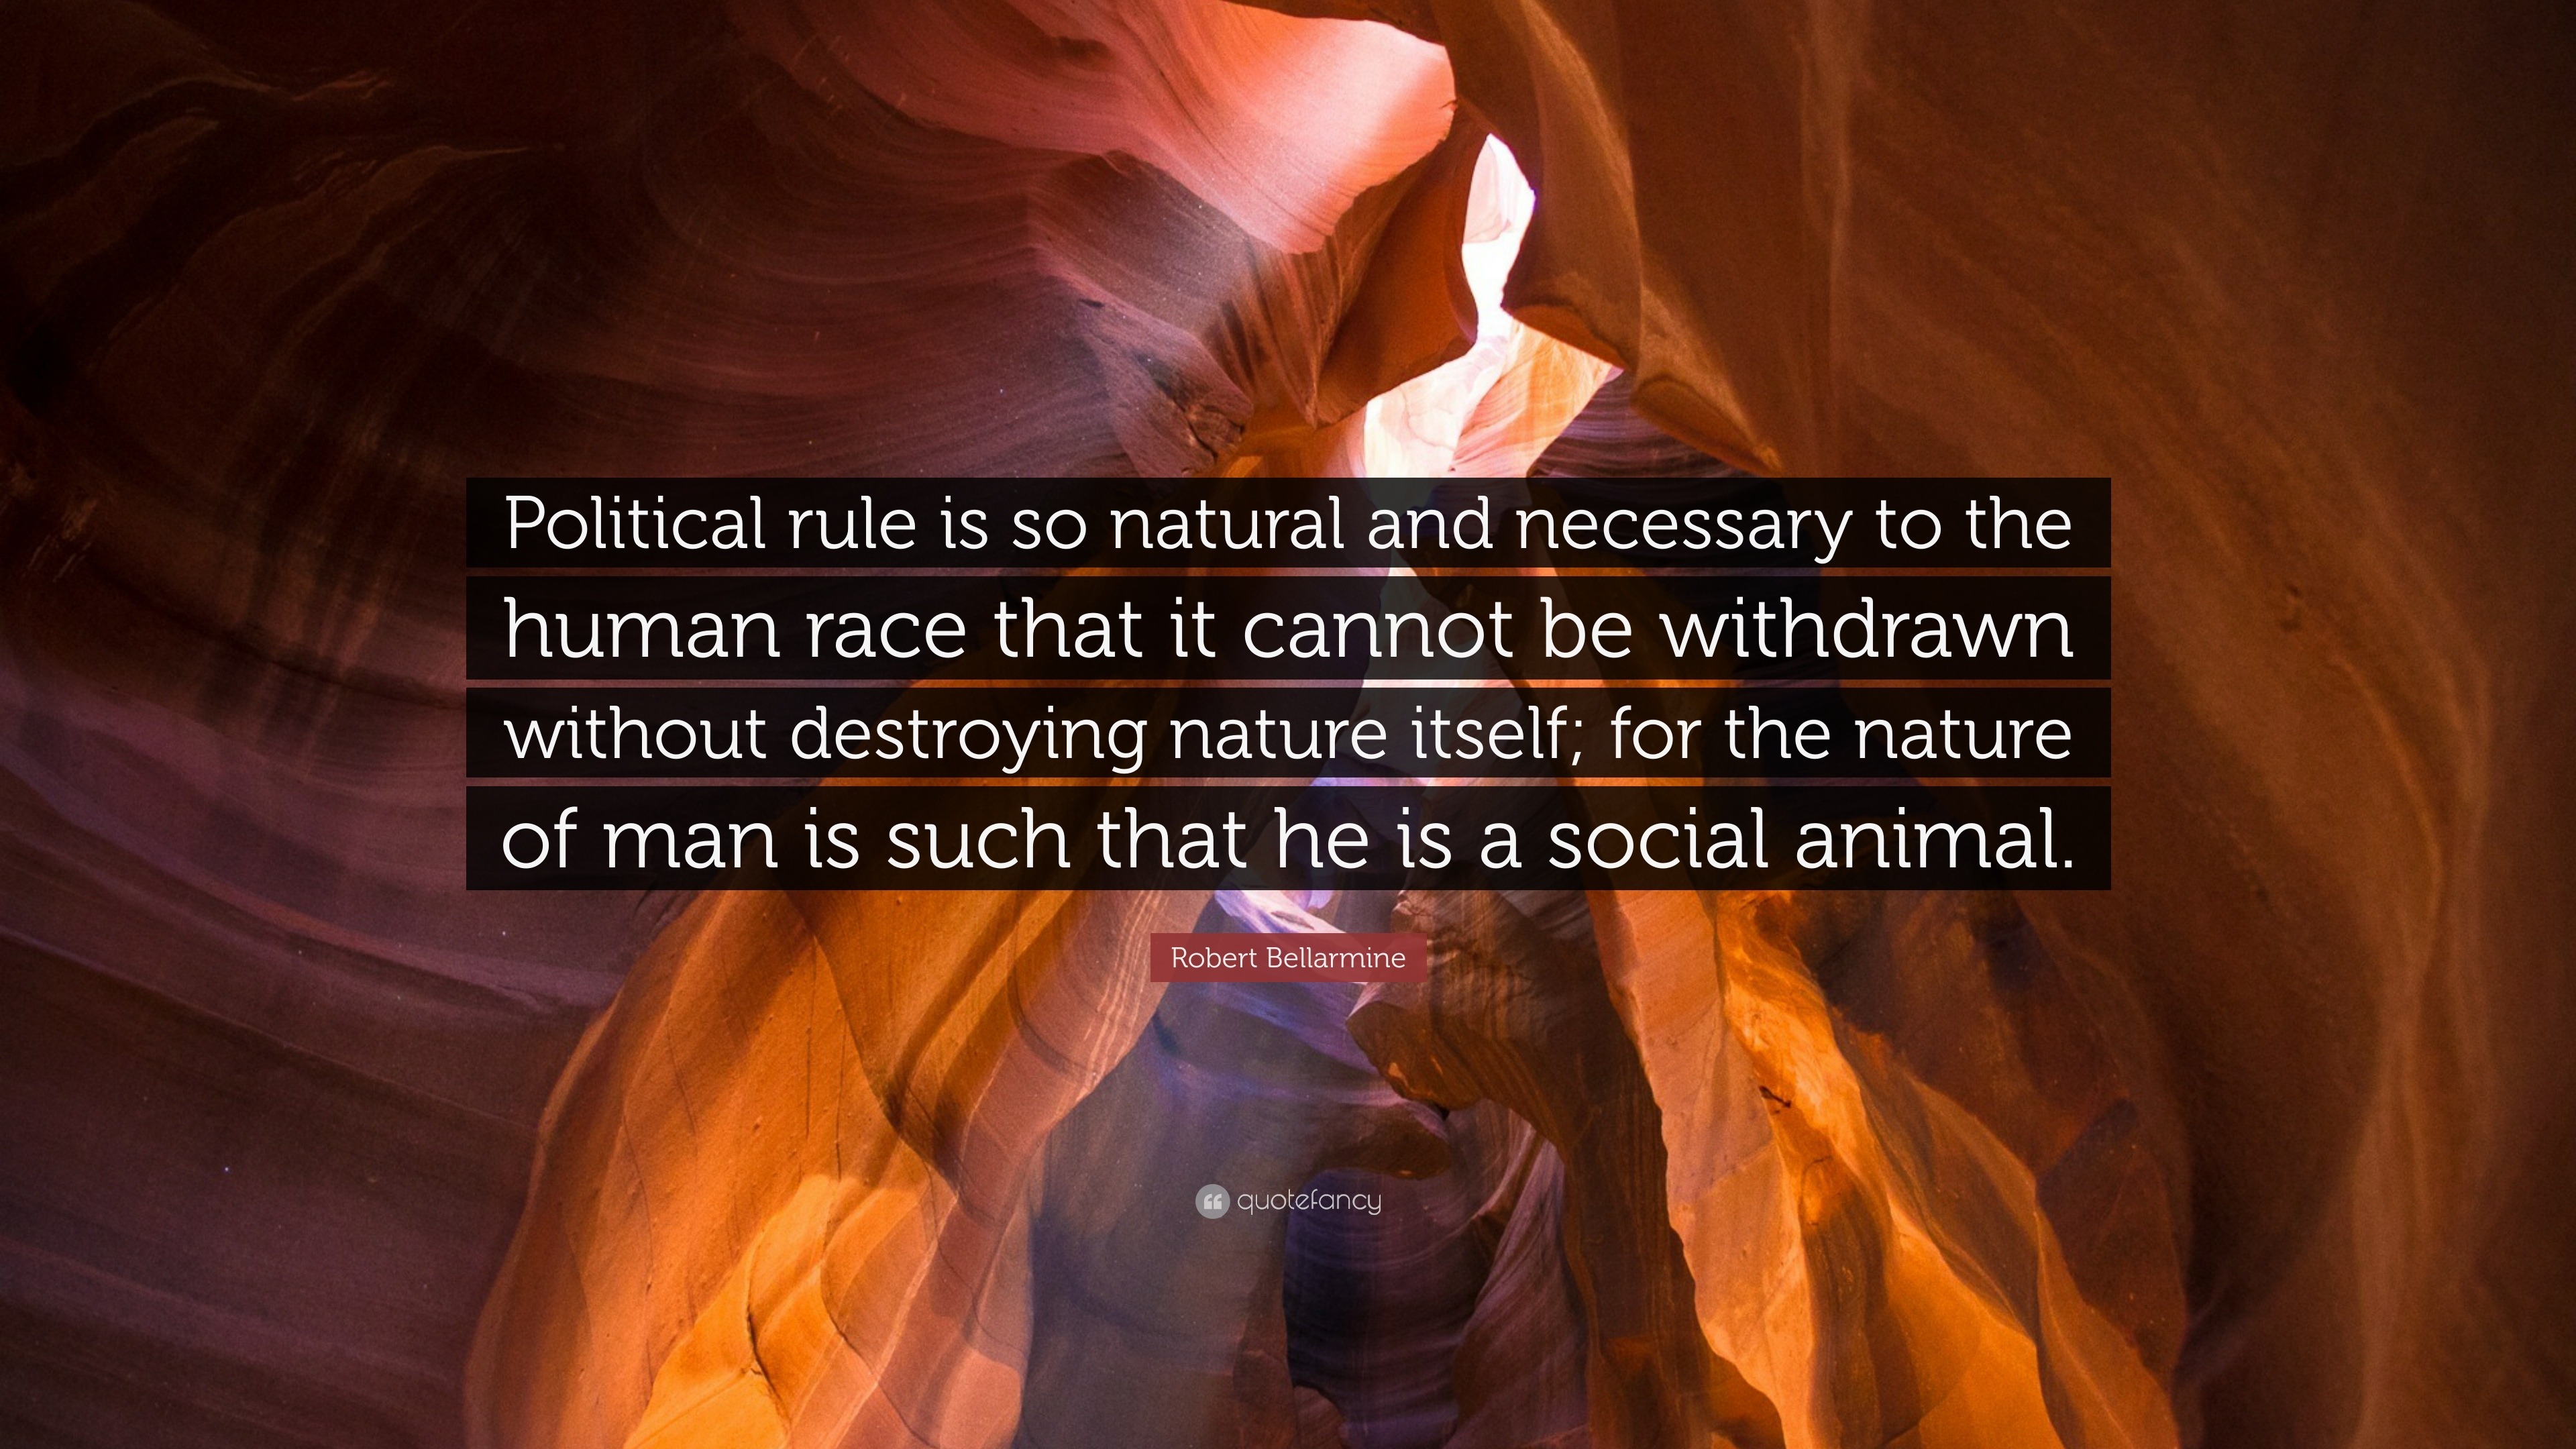 Robert Bellarmine Quote: “Political rule is so natural and necessary to the  human race that it cannot be withdrawn without destroying nature itsel...”